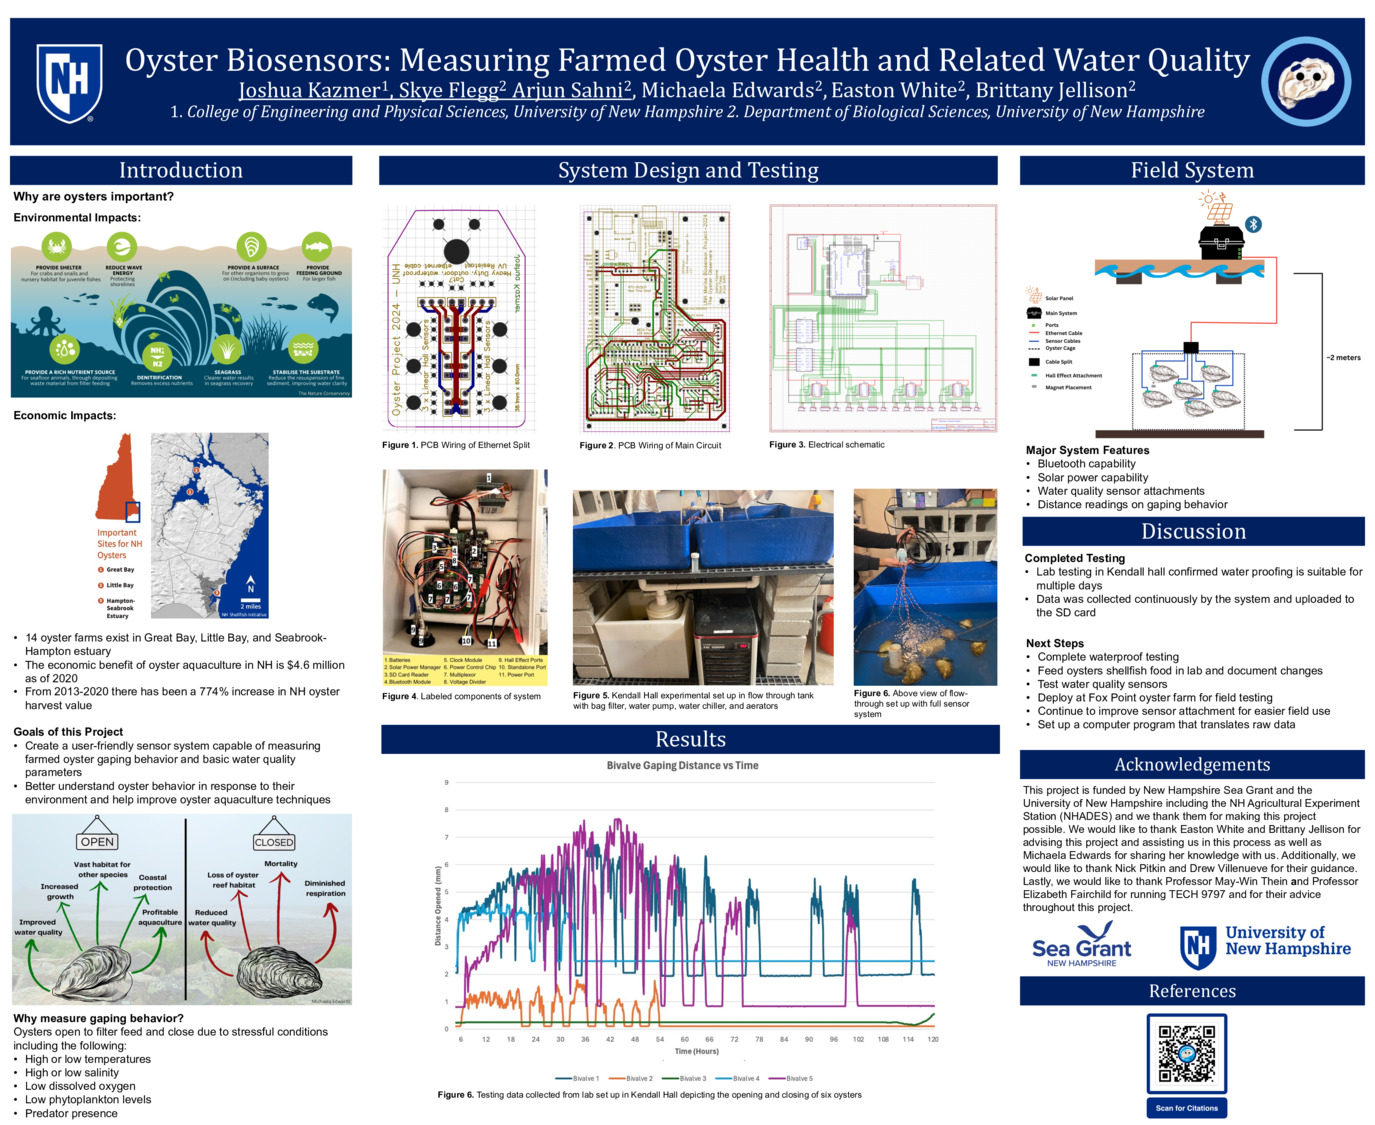 Oyster Biosensors: Measuring Farmed Oyster Health And Related Water Quality by smf1100